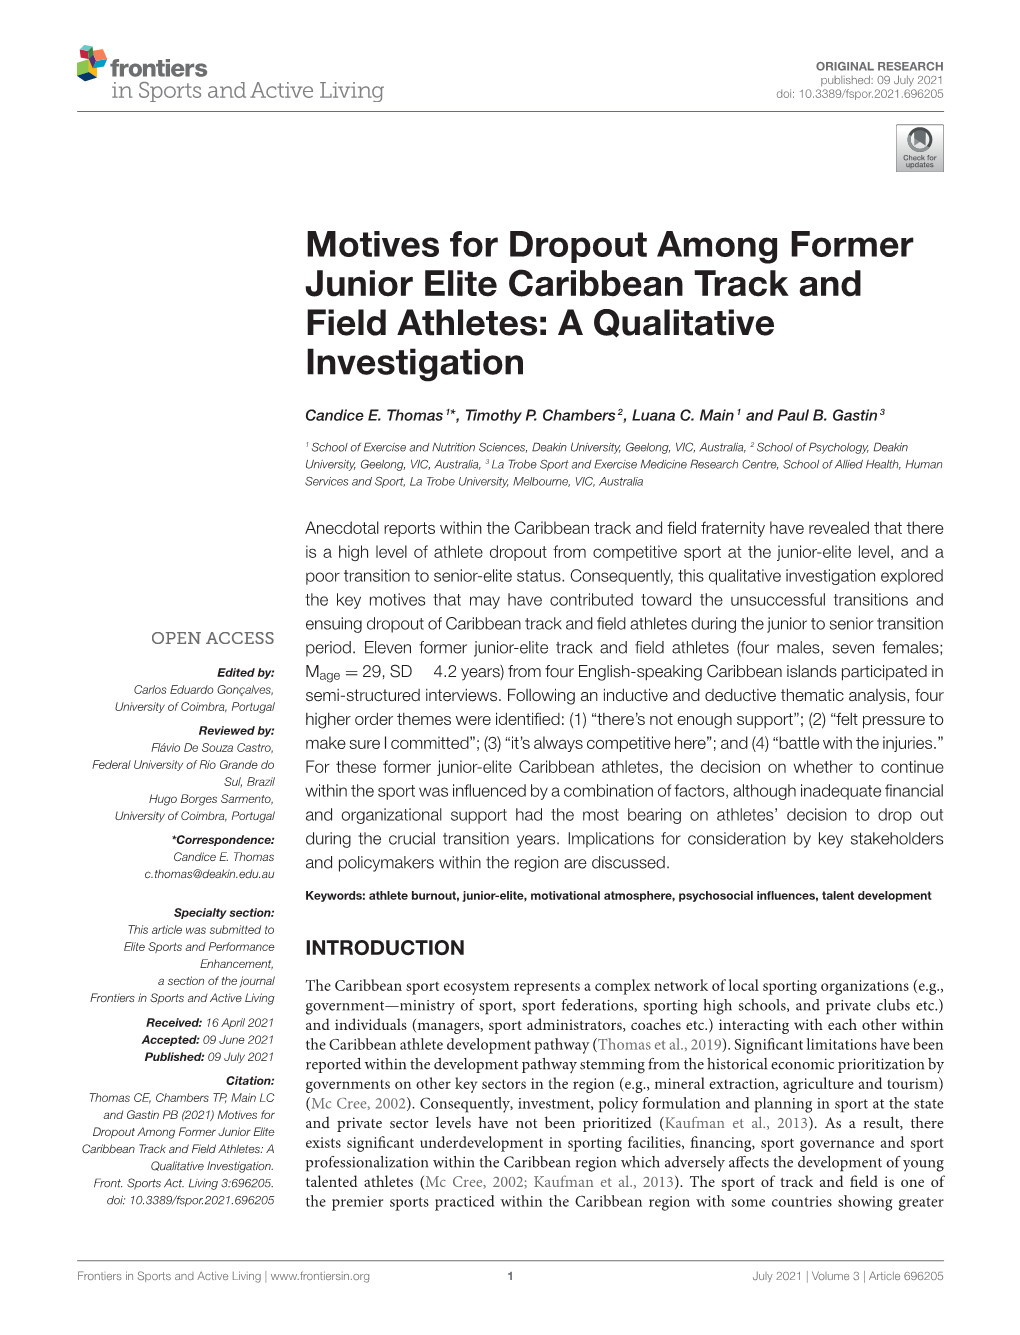 Motives for Dropout Among Former Junior Elite Caribbean Track and Field Athletes: a Qualitative Investigation